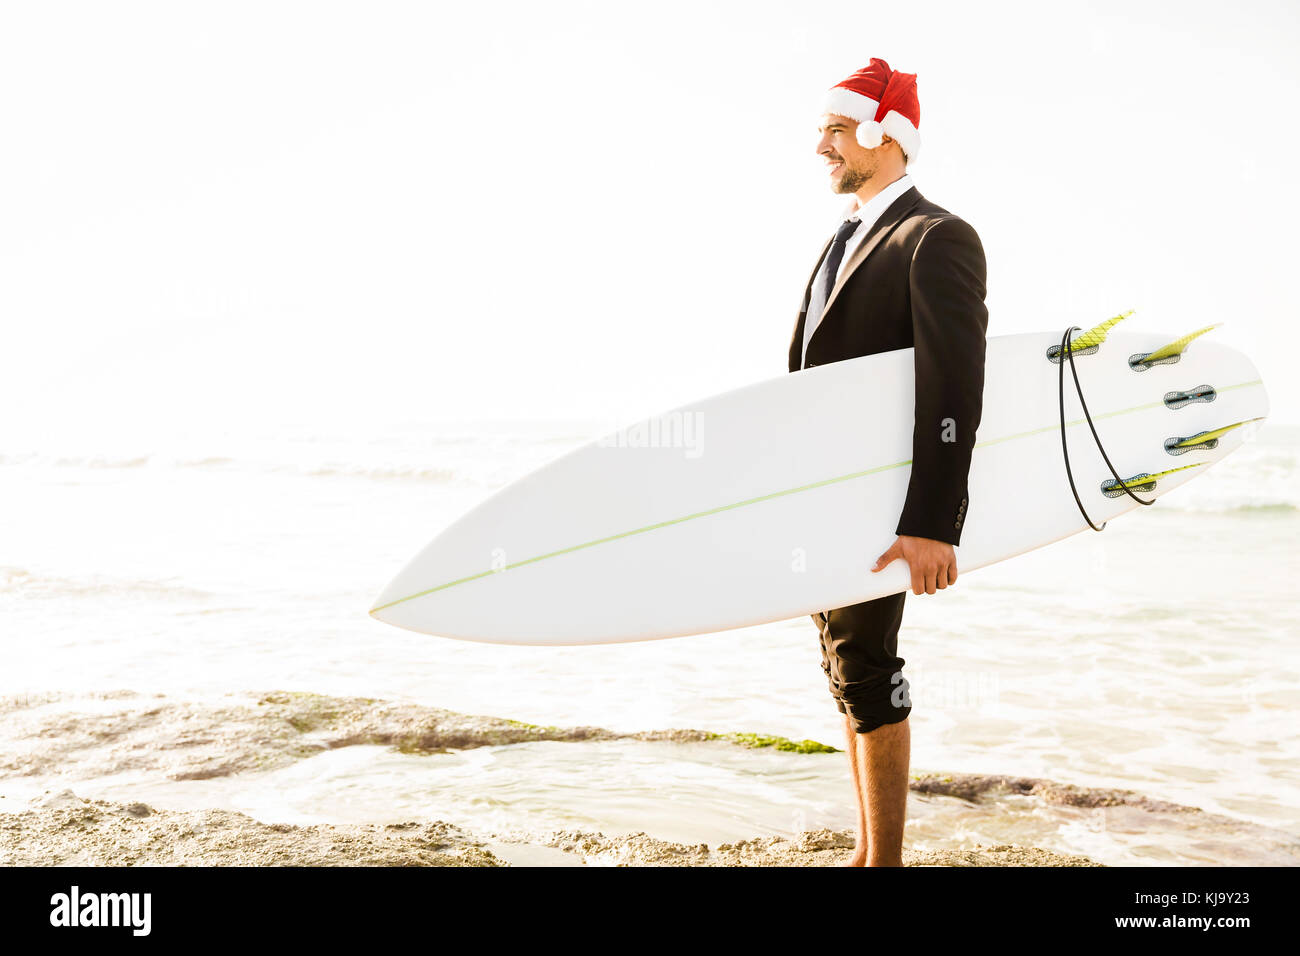 Surfeur d'affaires wearing a Santa hat and holding a surfboard Banque D'Images